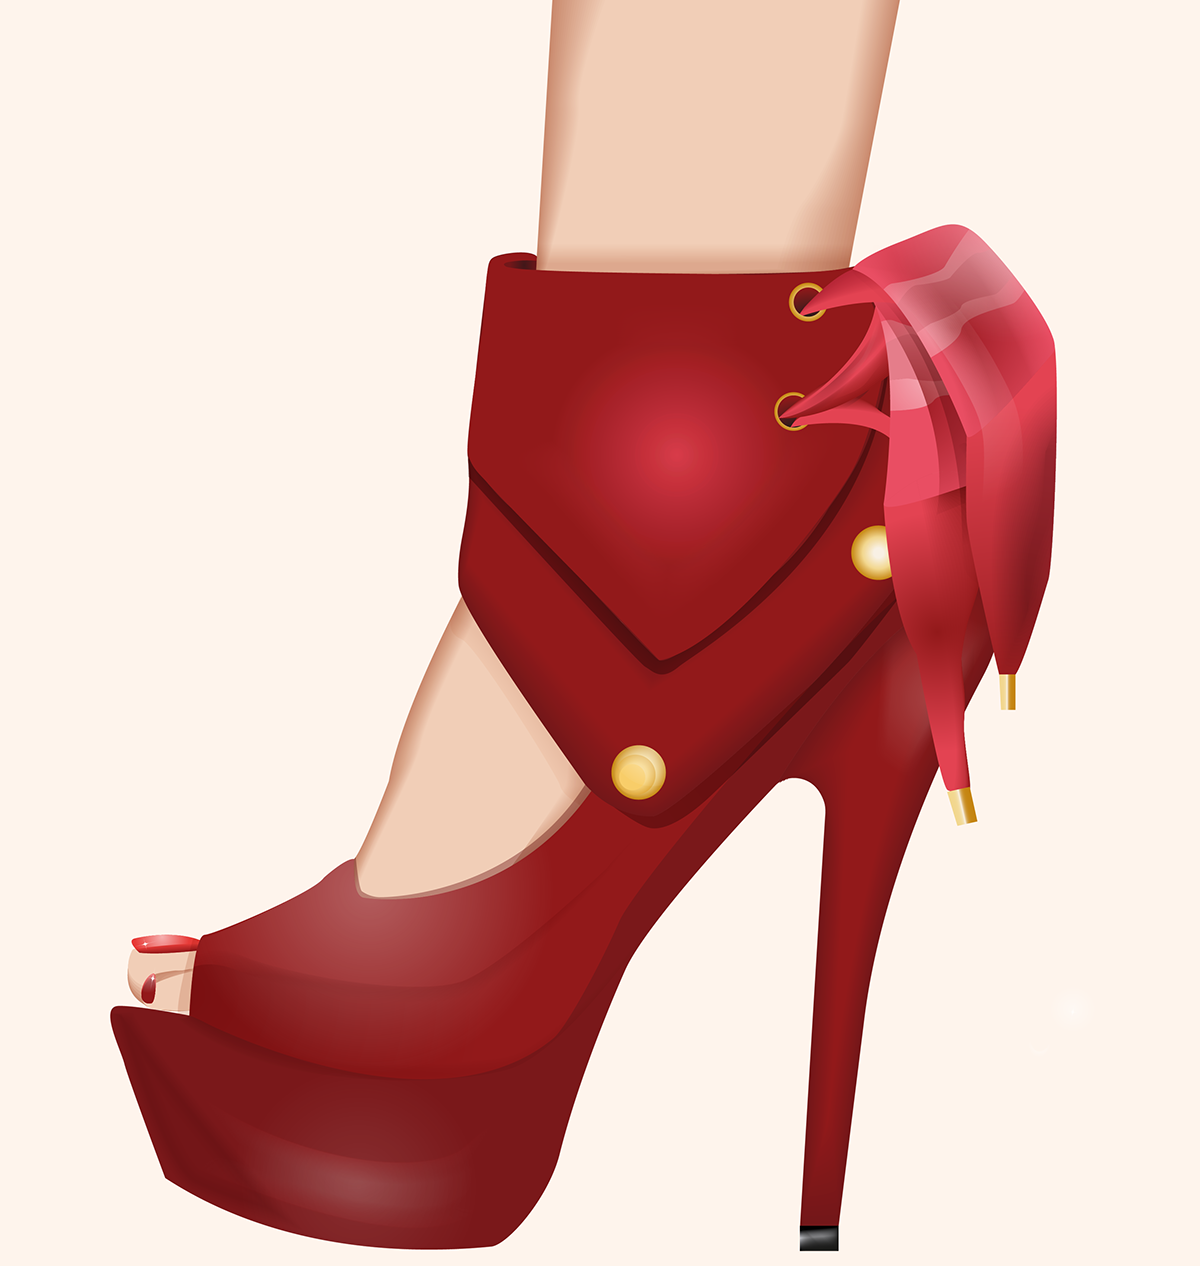 illustration of shoes fashion illustration red shoes illustration project vector arts vectorized shoes Vectorization color layers